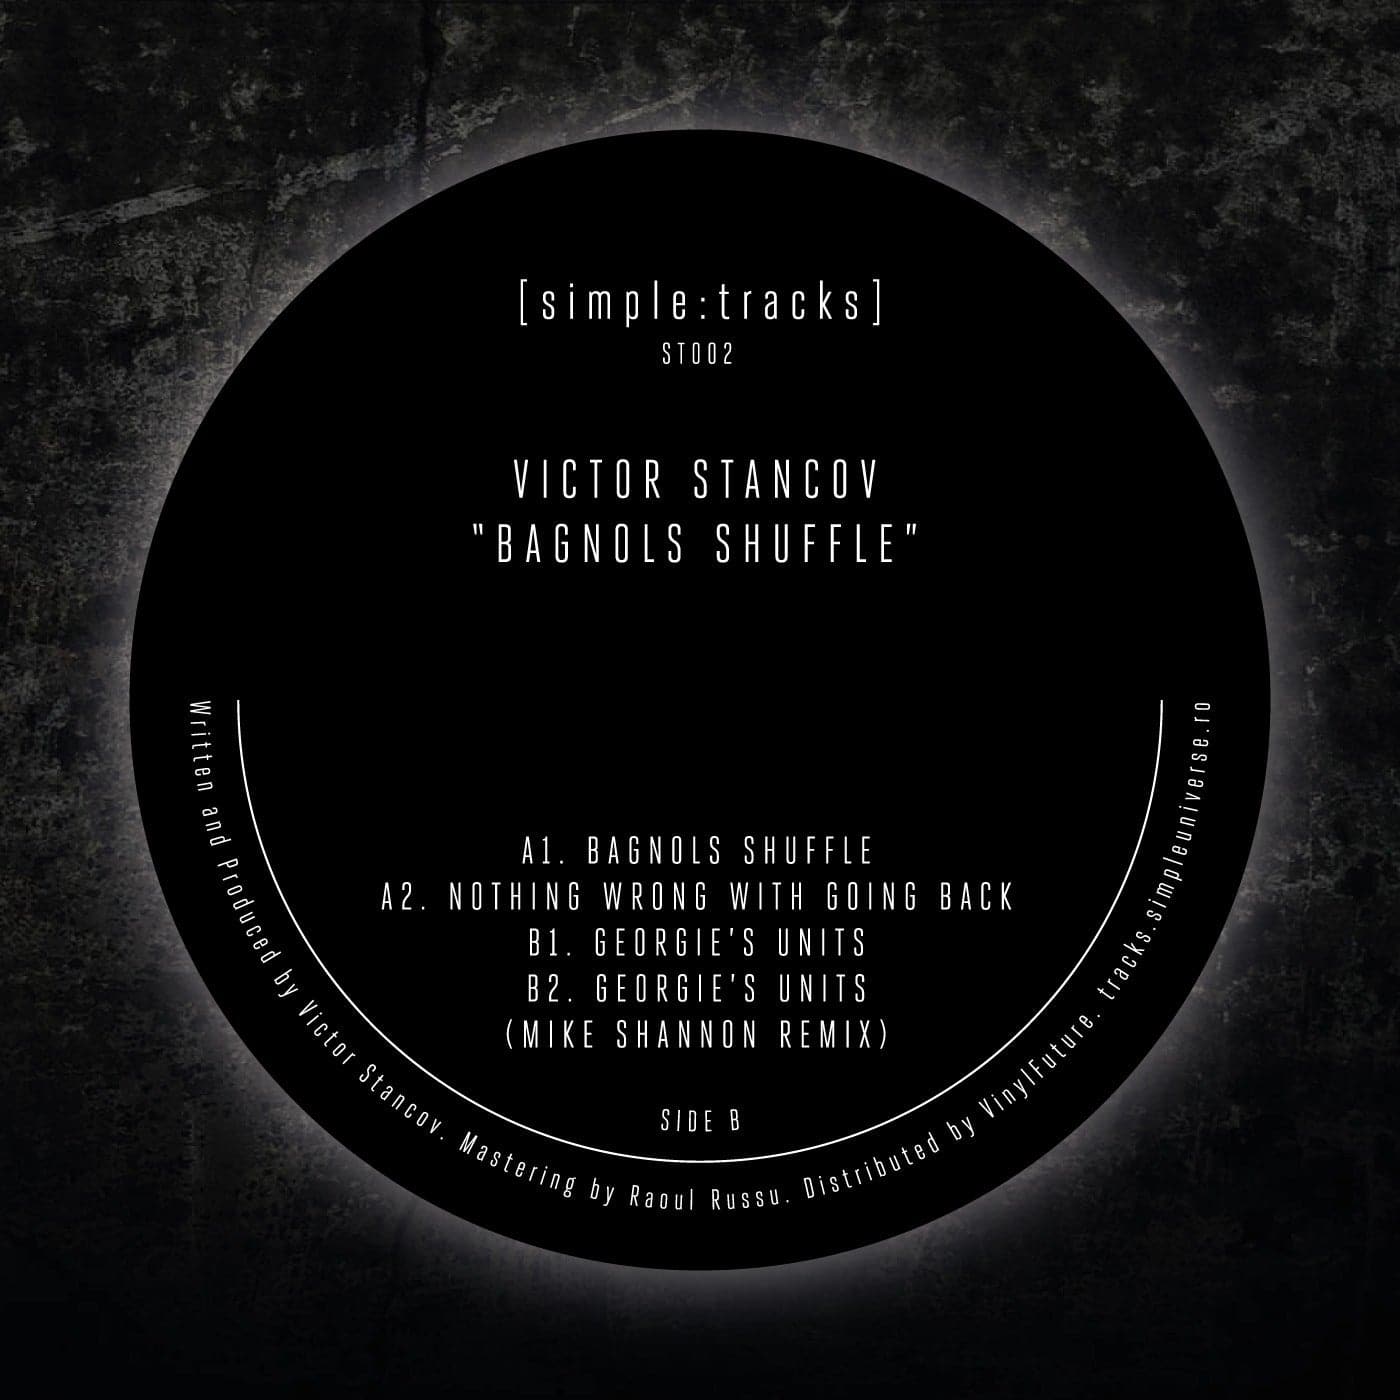 image cover: Victor Stancov - Bagnols Shuffle / ST002